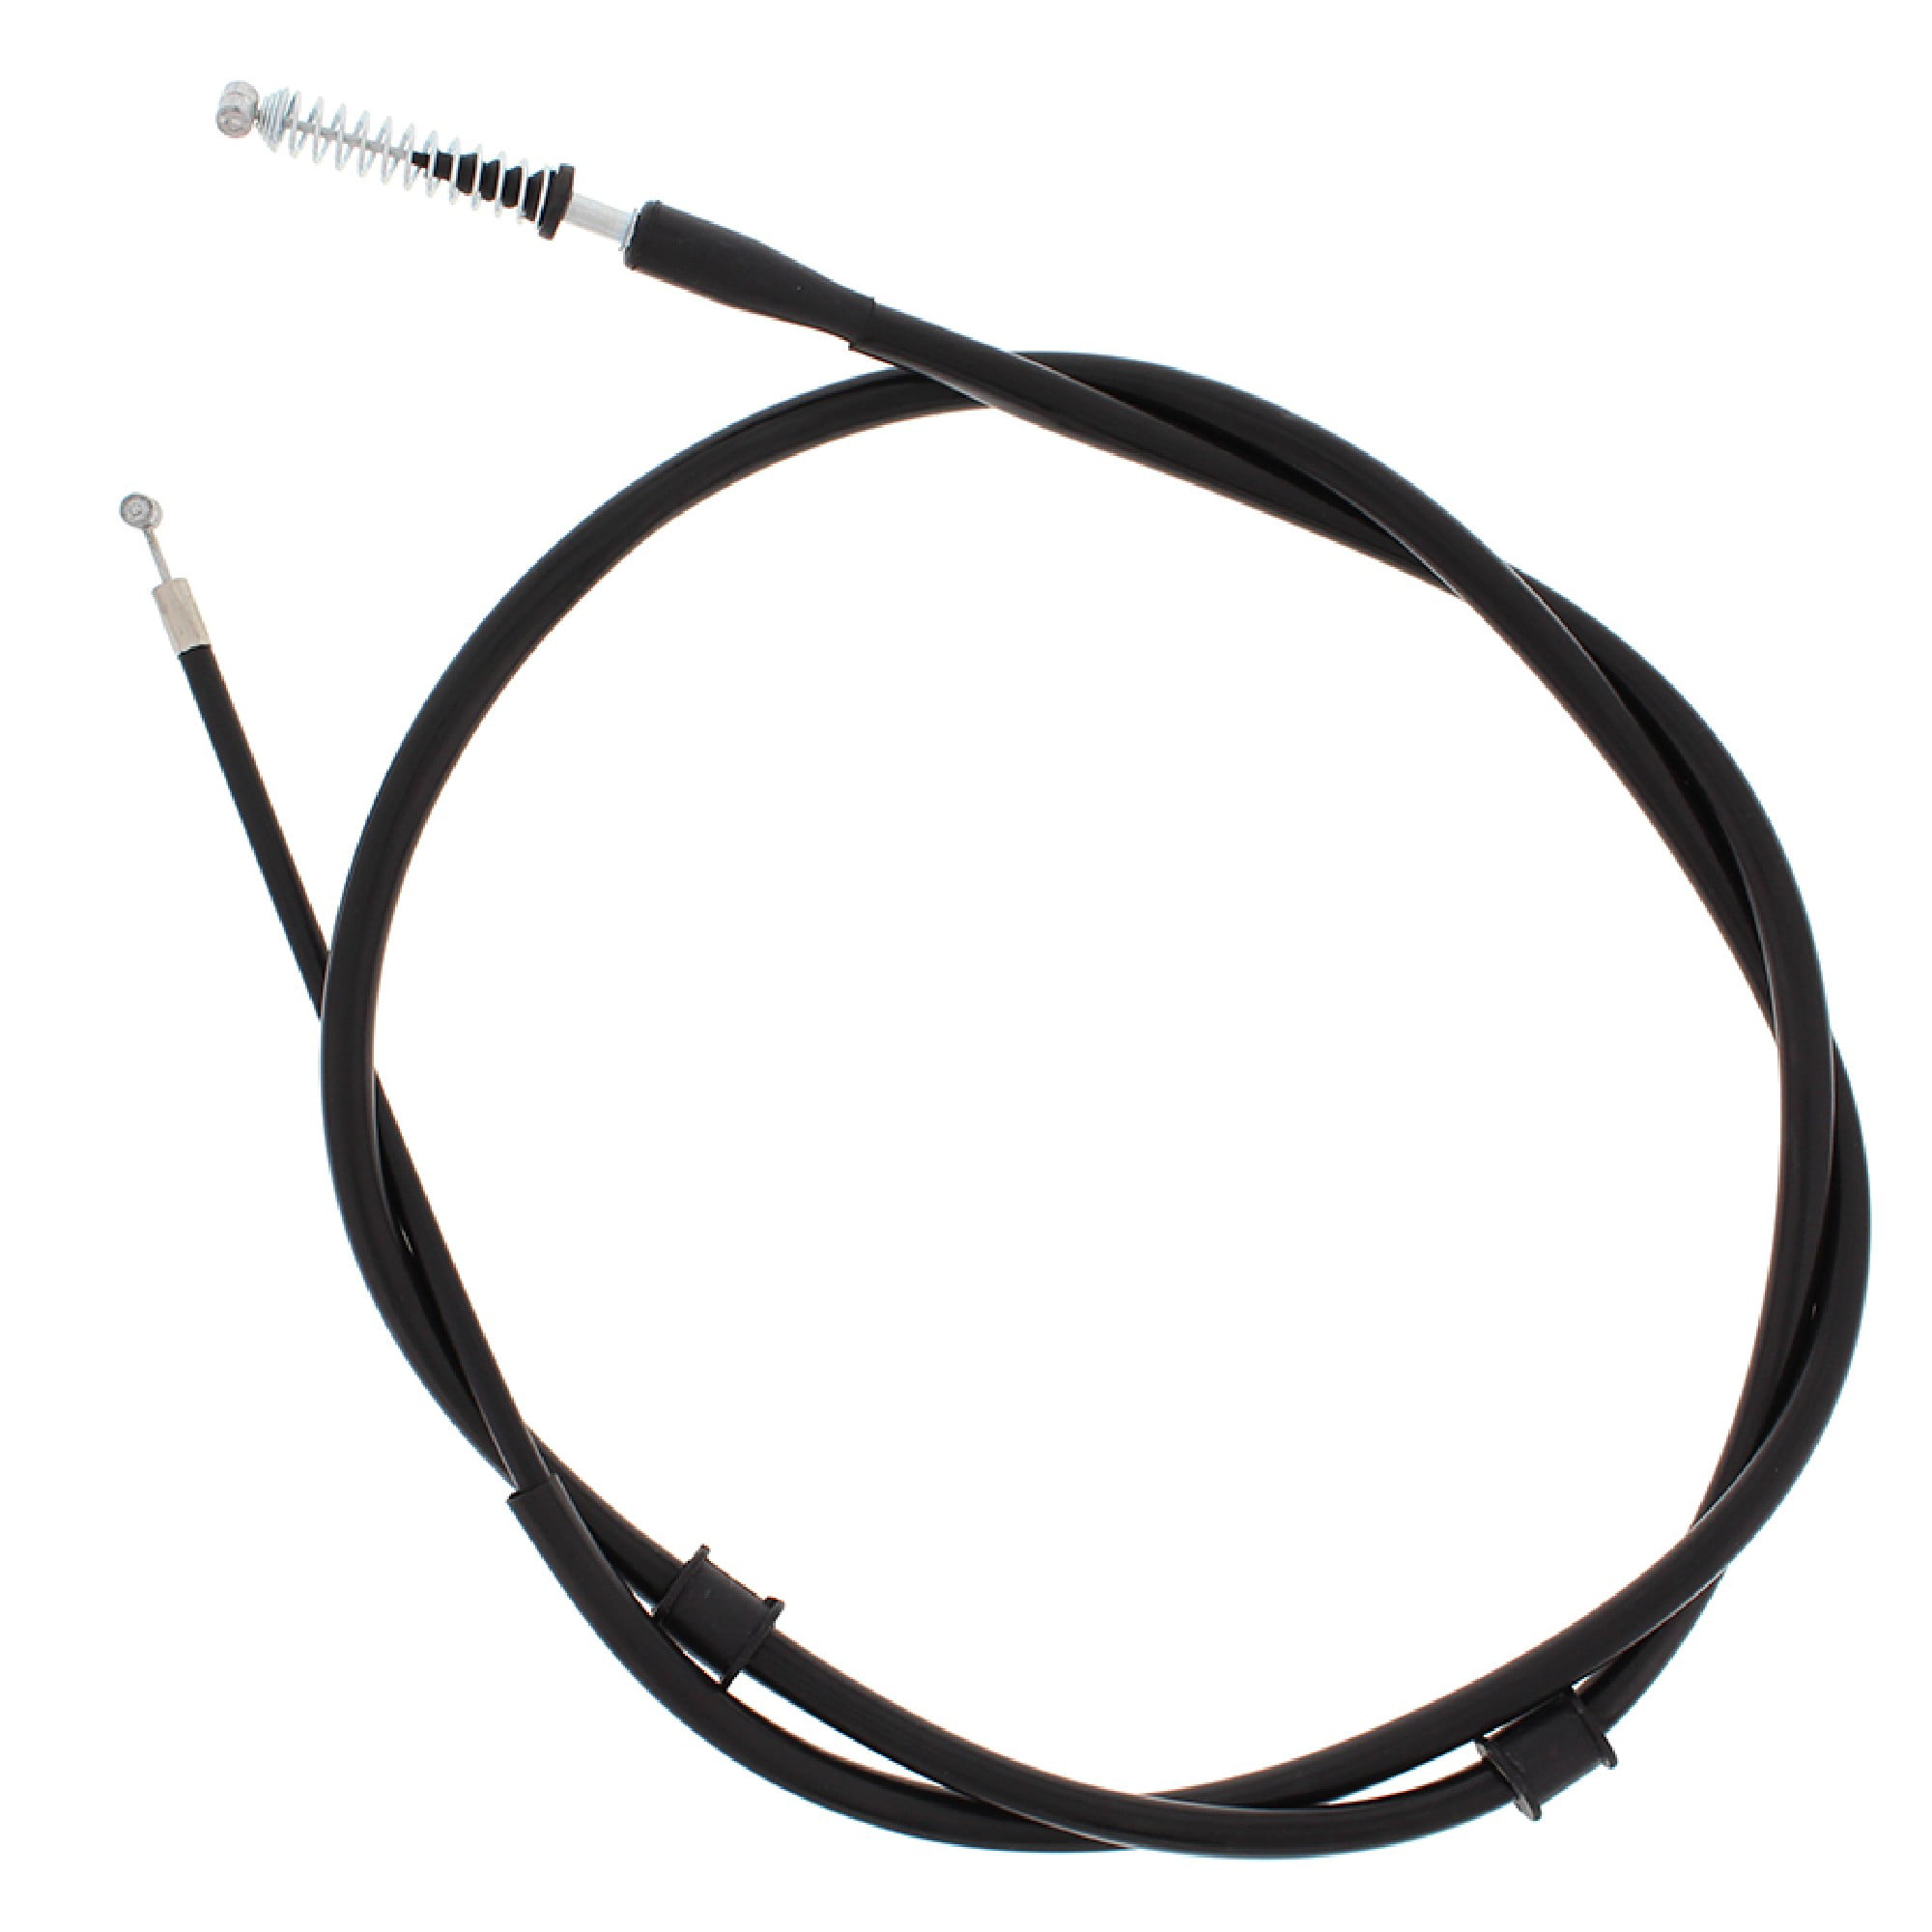 Quad 45 inch Foot Brake Cable for ATV 